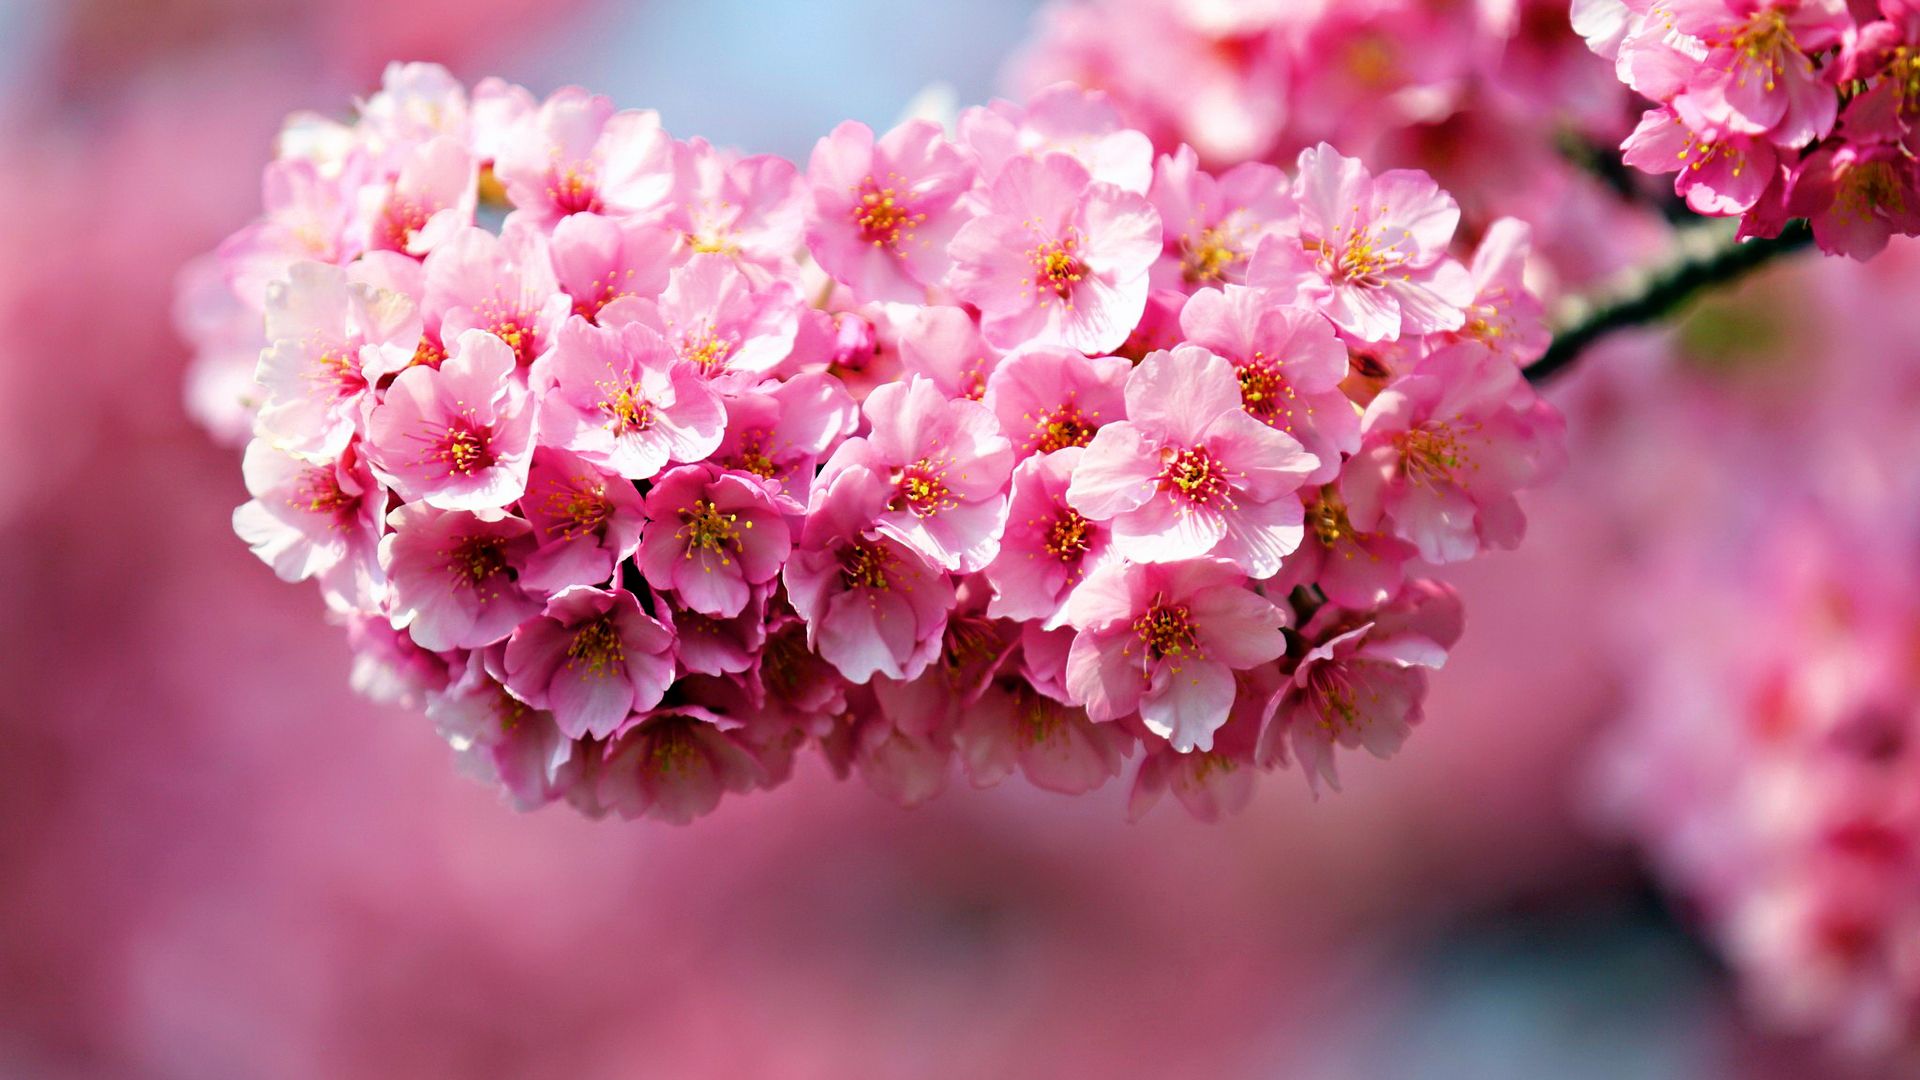 Pink Flower Wallpaper Best Quality Picture. Pink flowers wallpaper, Flower desktop wallpaper, Beautiful pink flowers